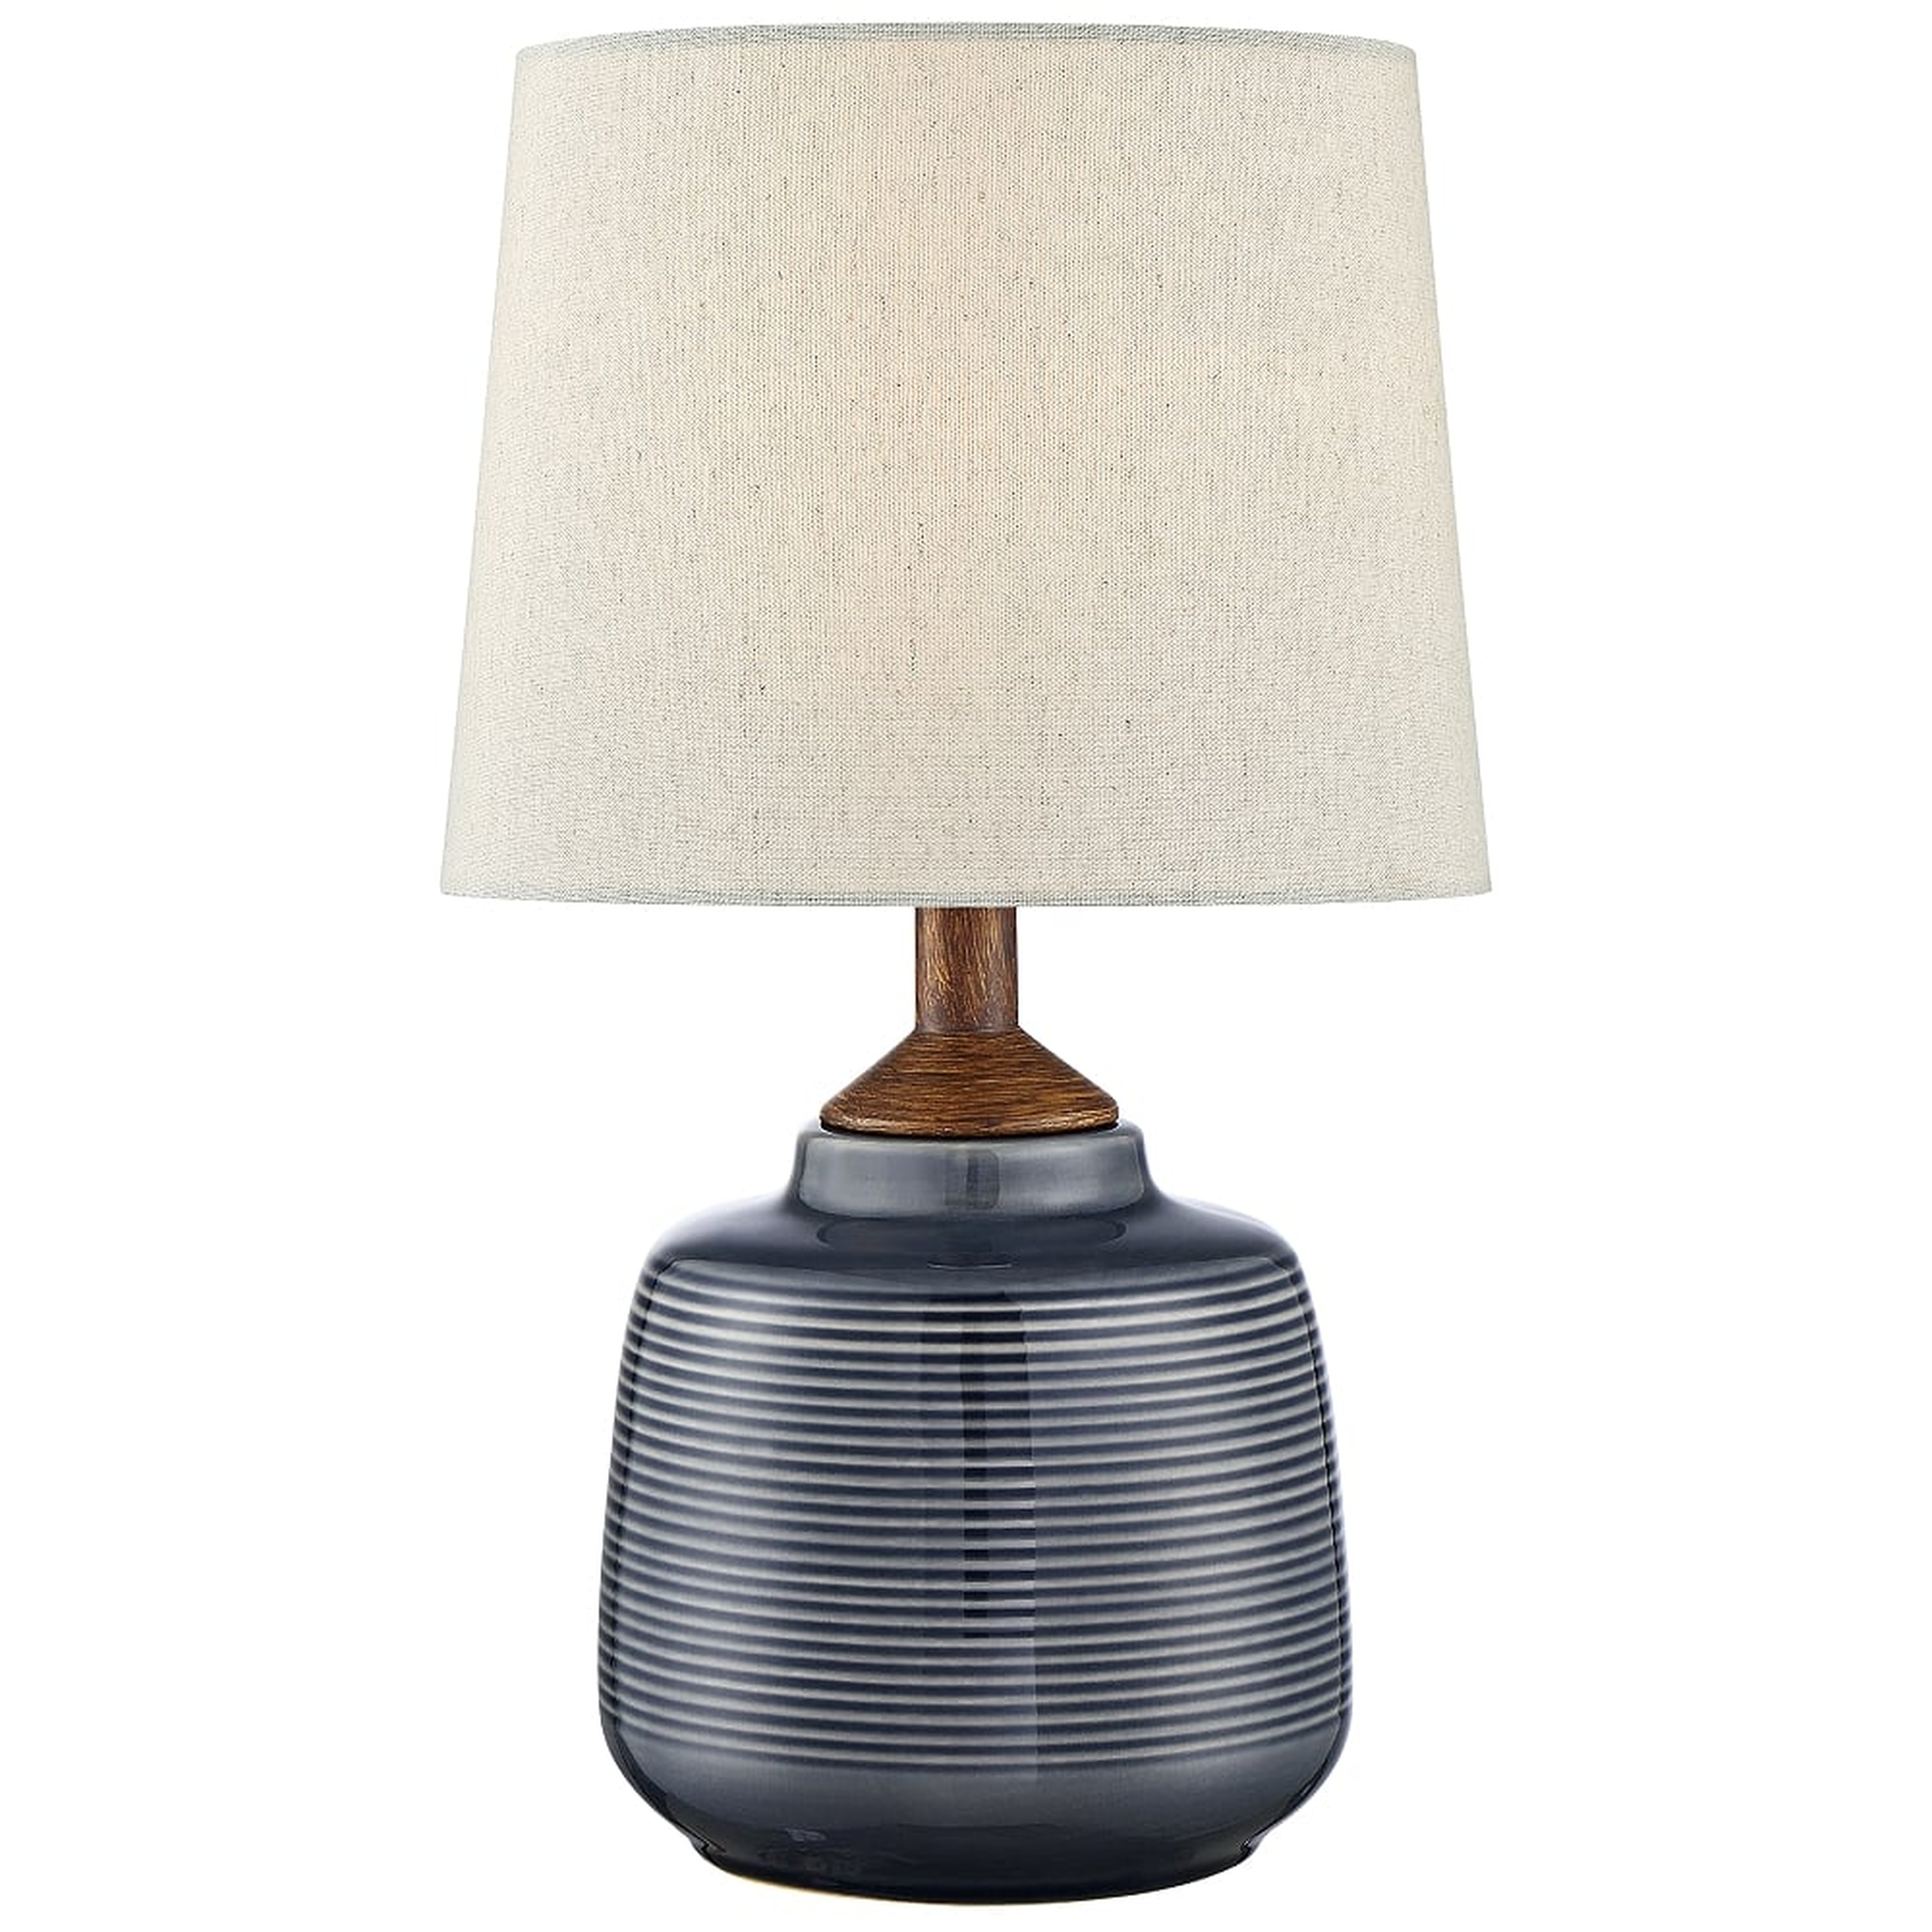 Lite Source Lismore 17" High Blue Ceramic Accent Table Lamp - Style # 69R44 - Lamps Plus